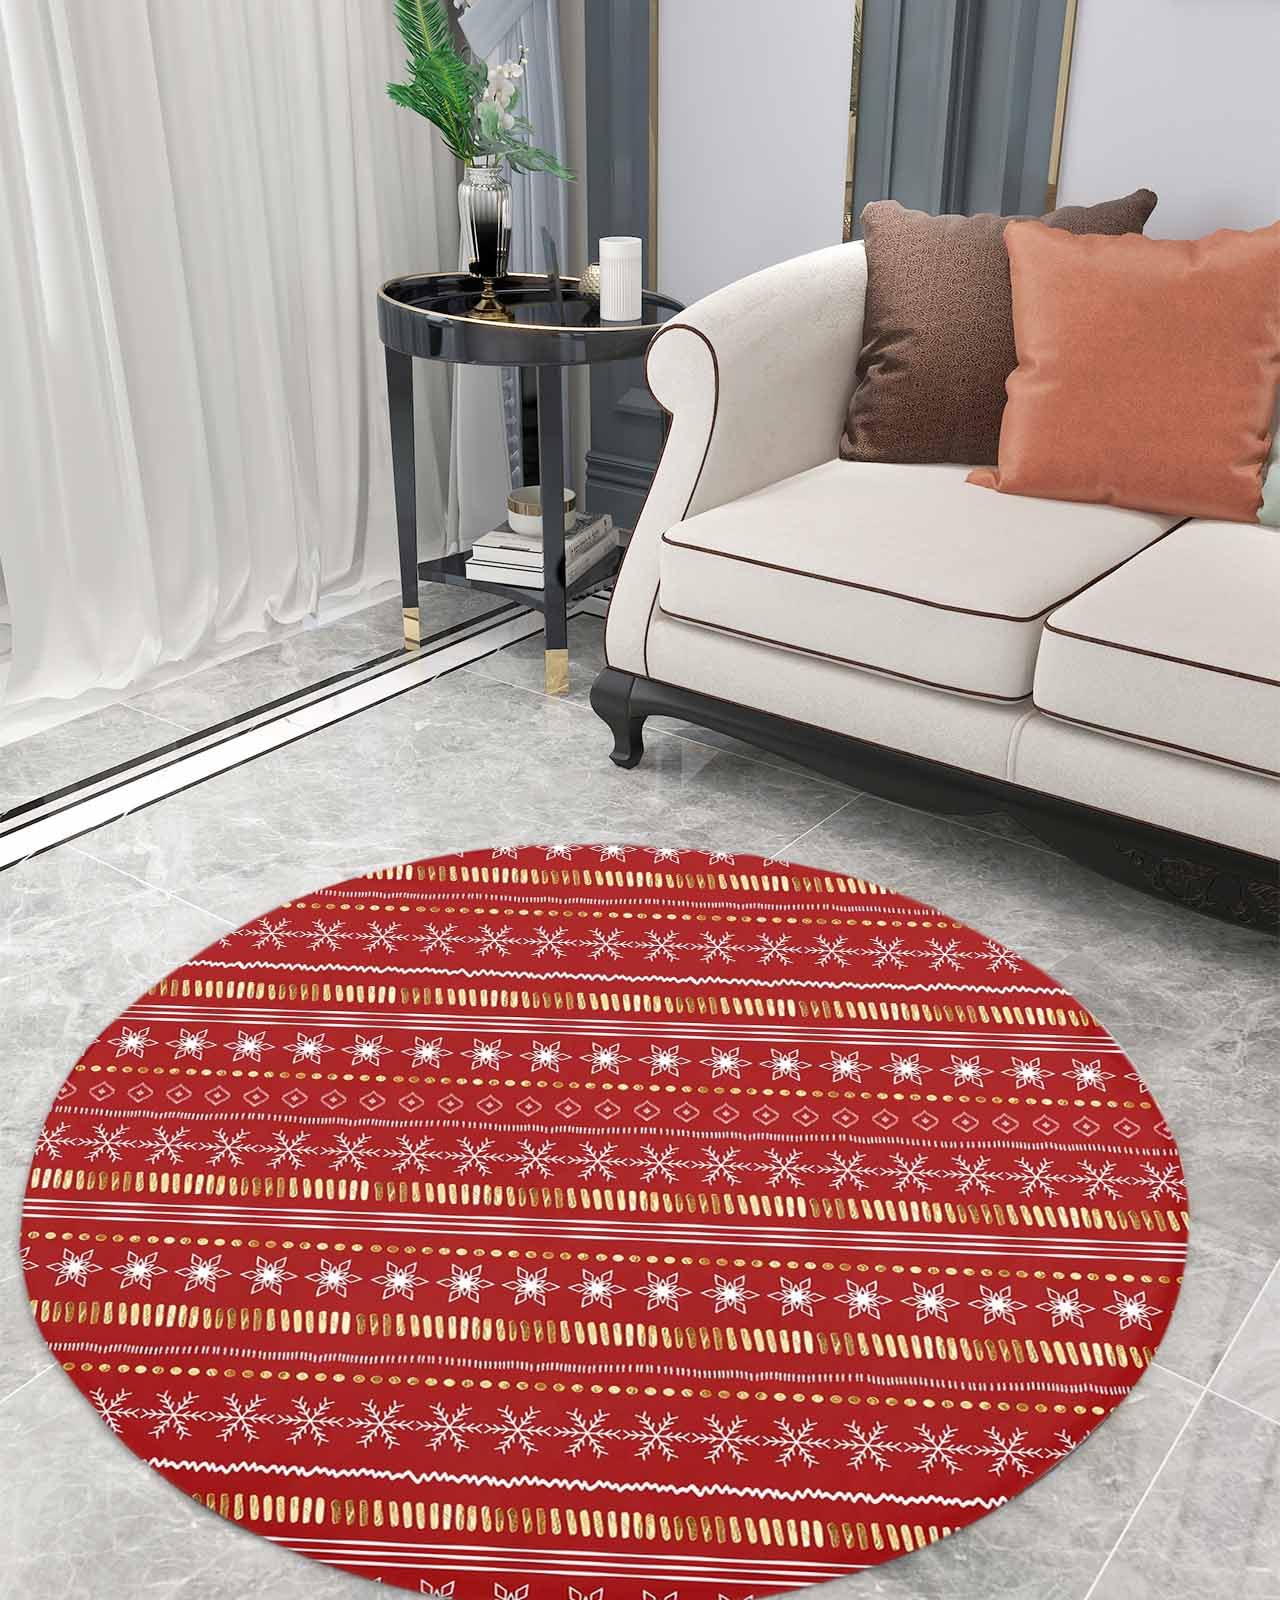 Christmas Fluffy Round Area Rug Carpets 3.3ft, Plush Shaggy Carpet Soft Circular Rugs, Non-Slip Fuzzy Accent Floor Mat for Living Room Bedroom Nursery Home Decor Boho Red Gold Geometric Stripes Dots